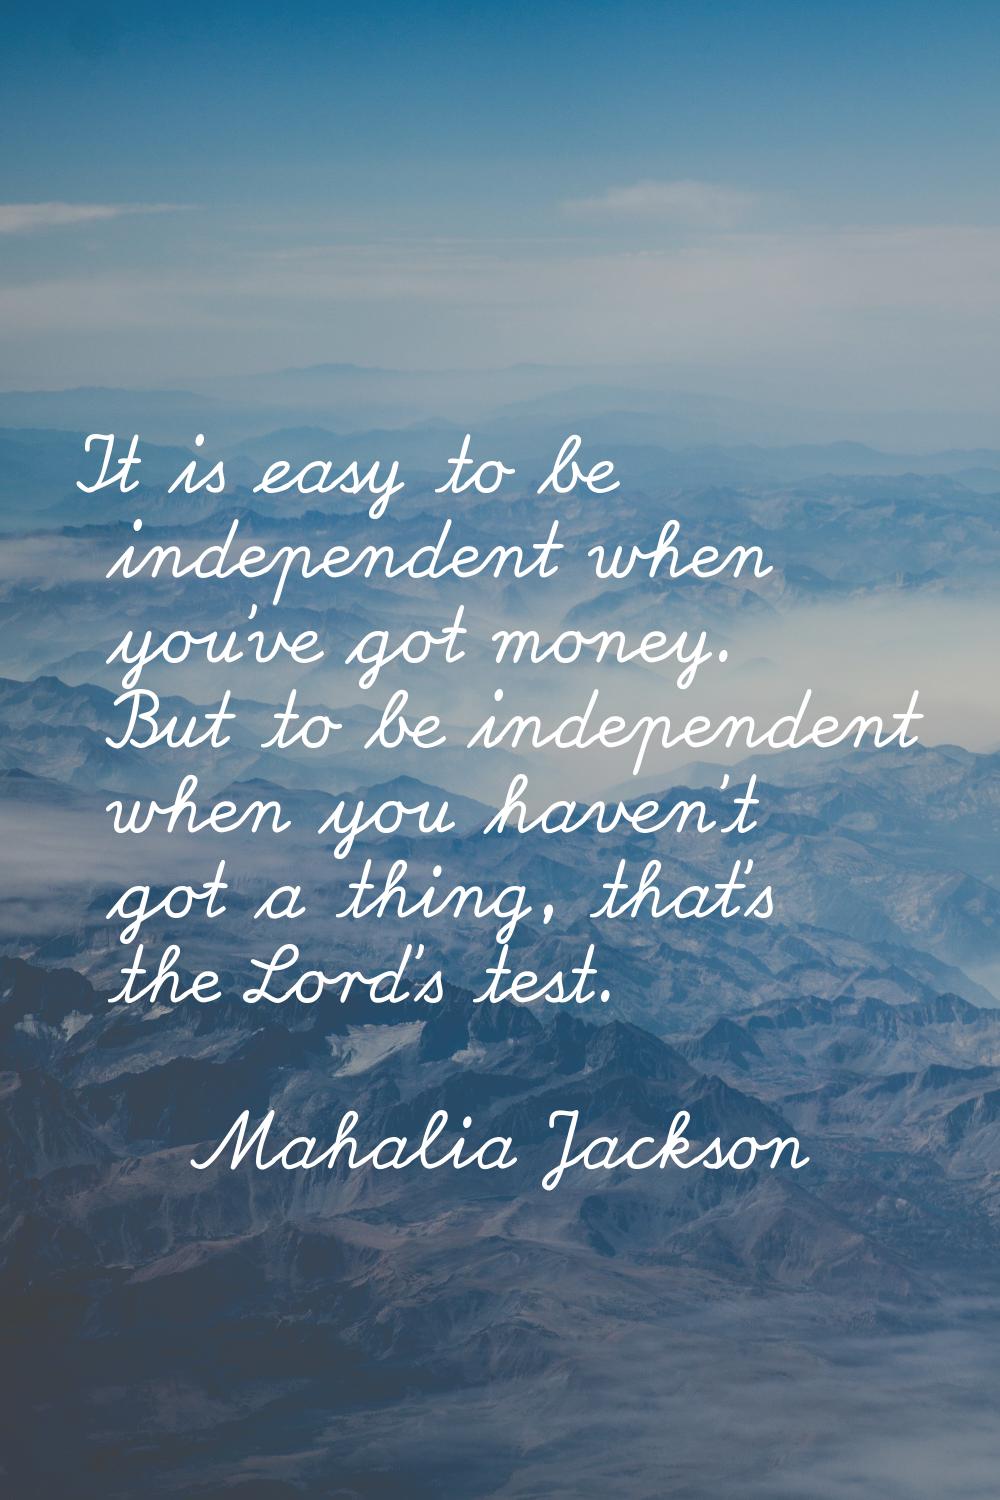 It is easy to be independent when you've got money. But to be independent when you haven't got a th